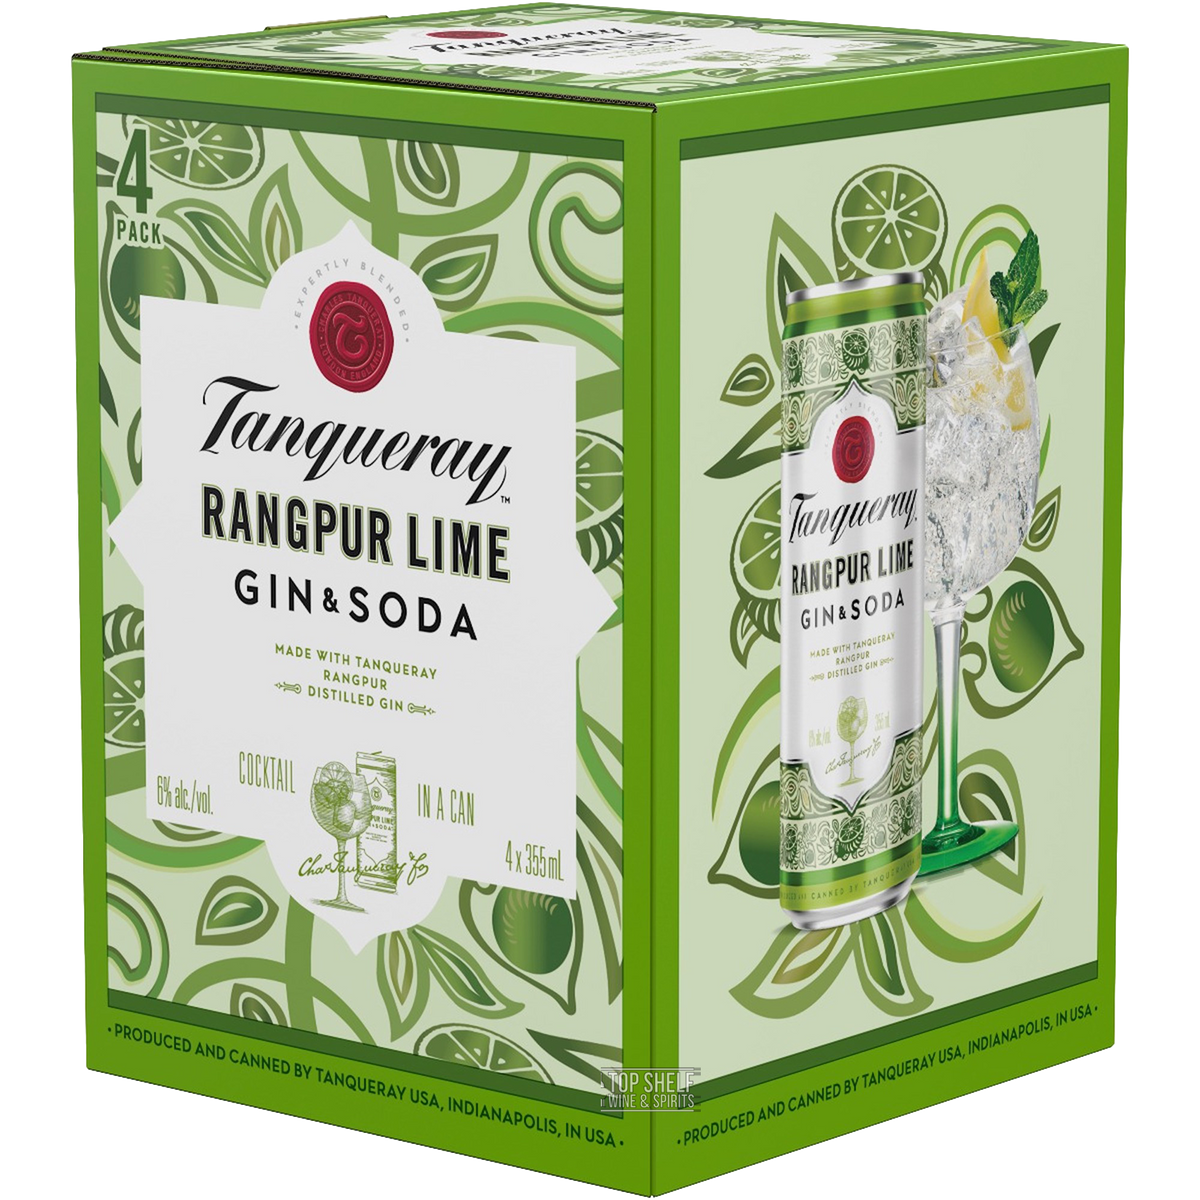 Tanqueray Gin Cans Soda pack & Rangpur 4 Lime